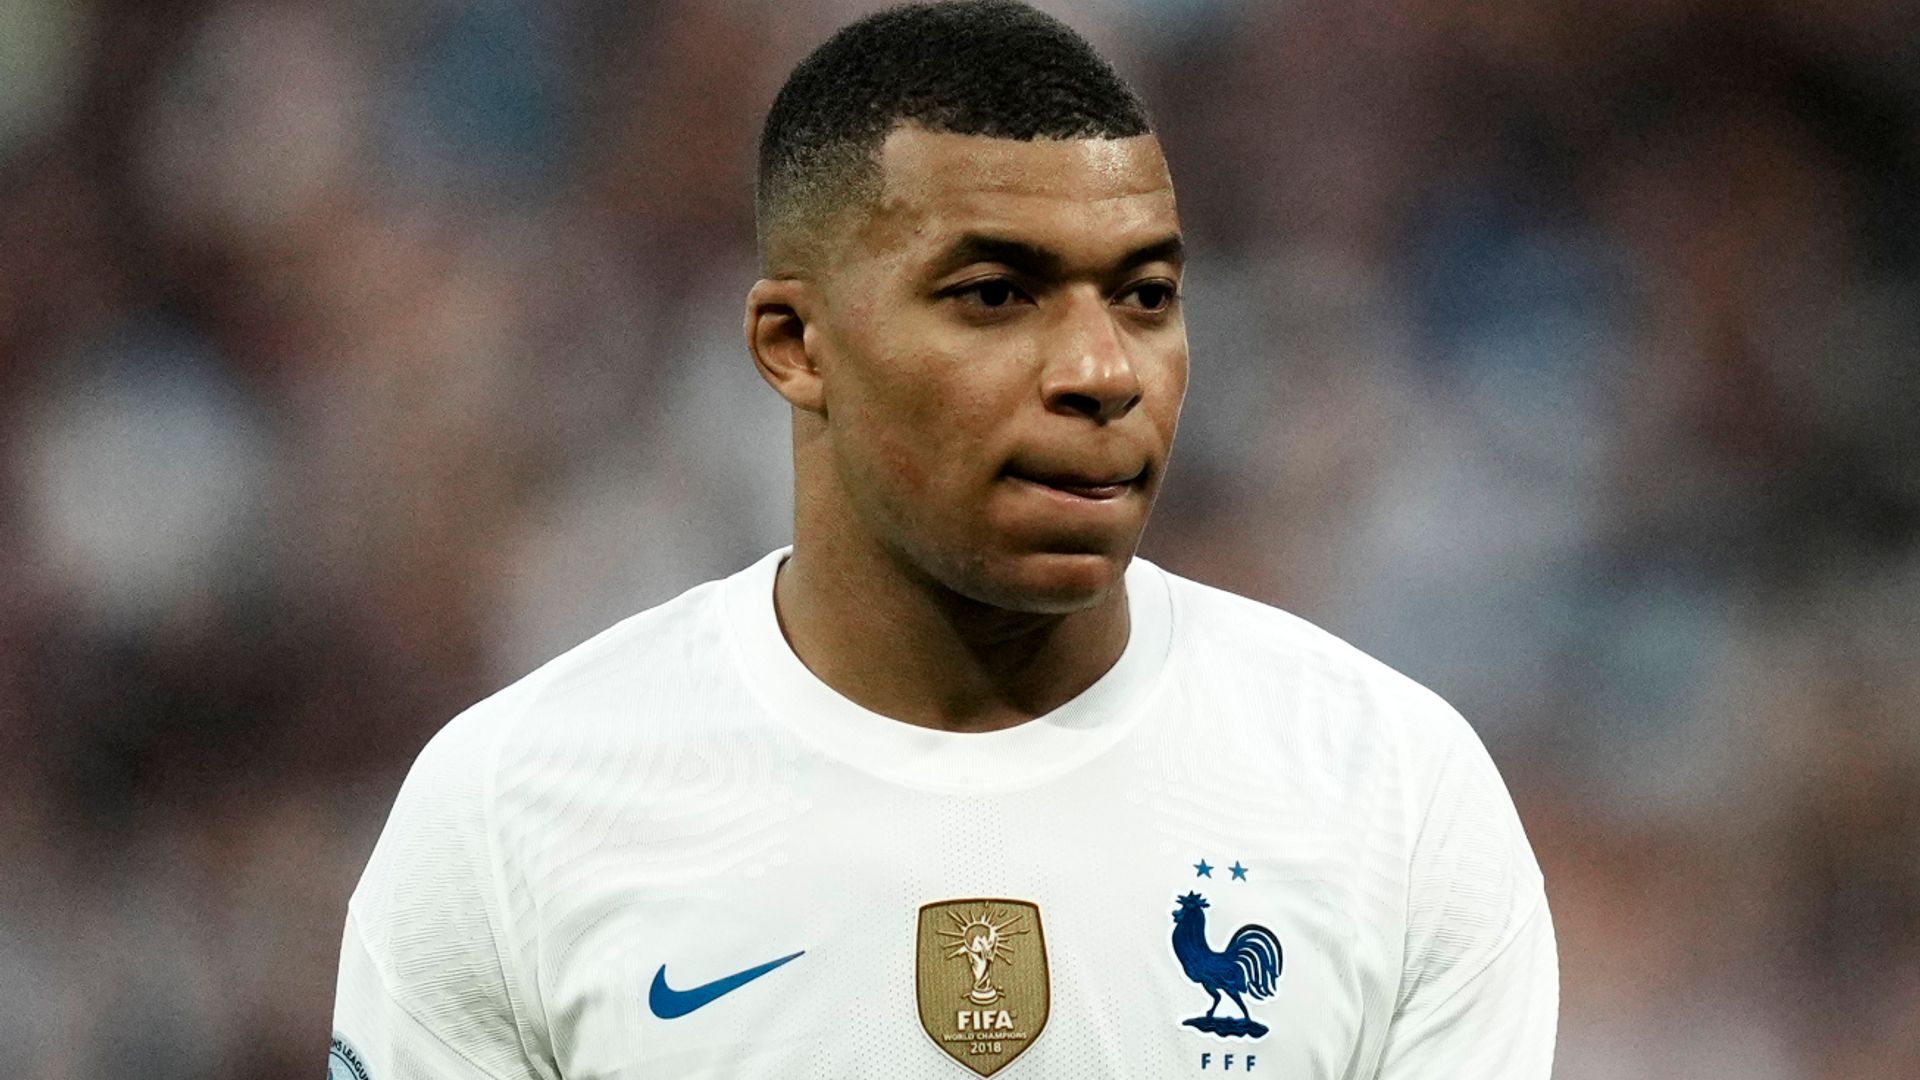 Mbappe says FFF boss denied racist abuse that pushed him towards retirement